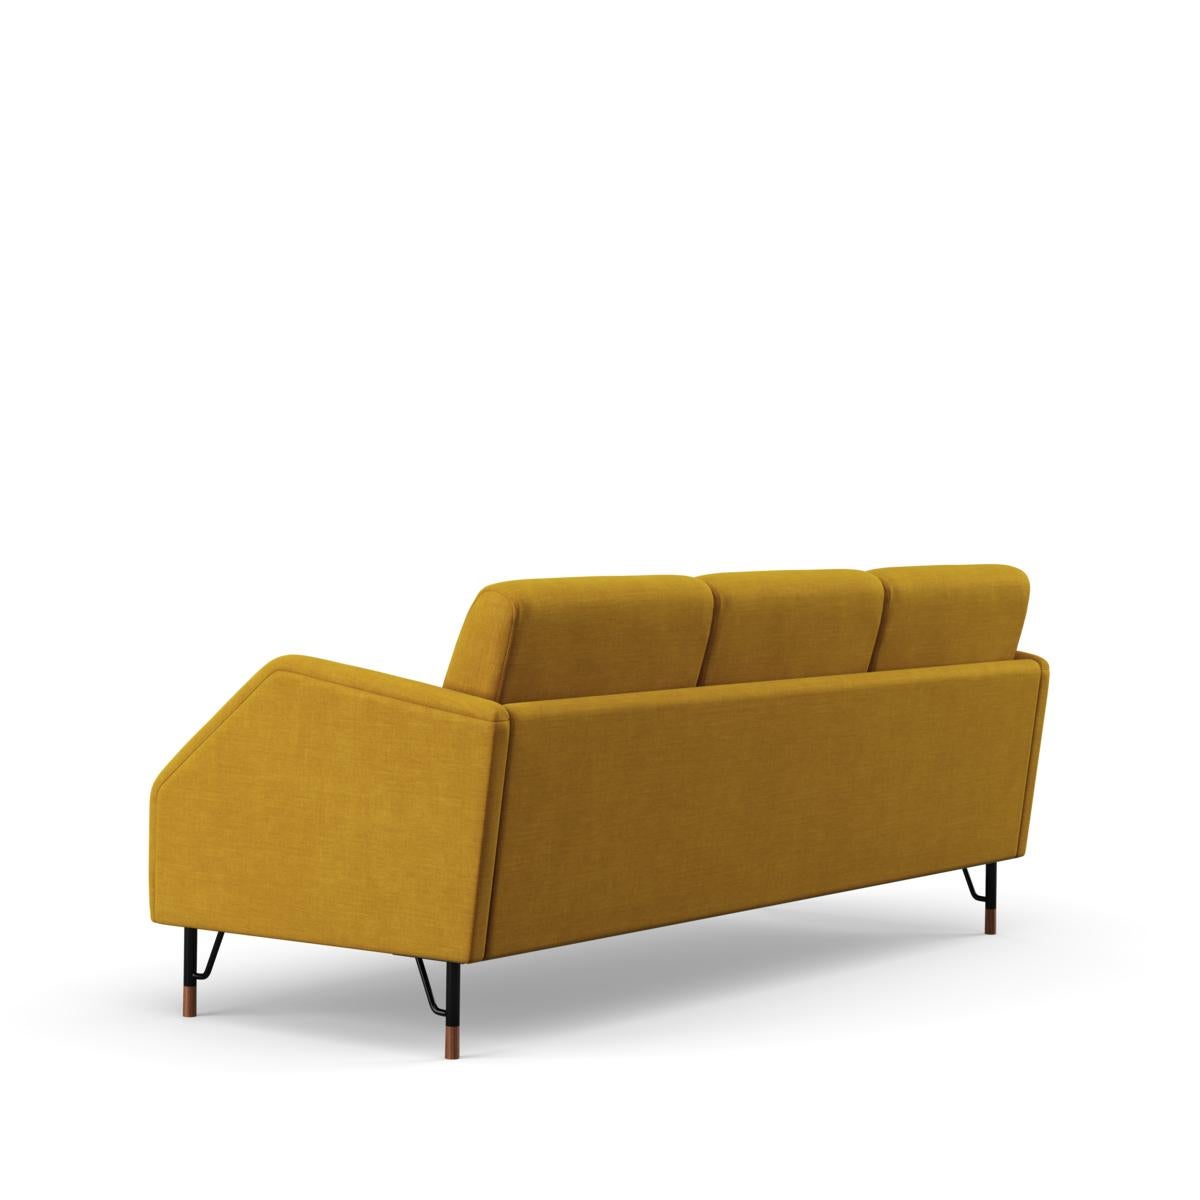 Sofa designed by Finn Juhl in 1953, relaunched in 2012.
Manufactured by House of Finn Juhl in Denmark.

During the 1950s, Finn Juhl designed a series of furniture for the company Bovirke. This series is characterized by a streamlined, industrial